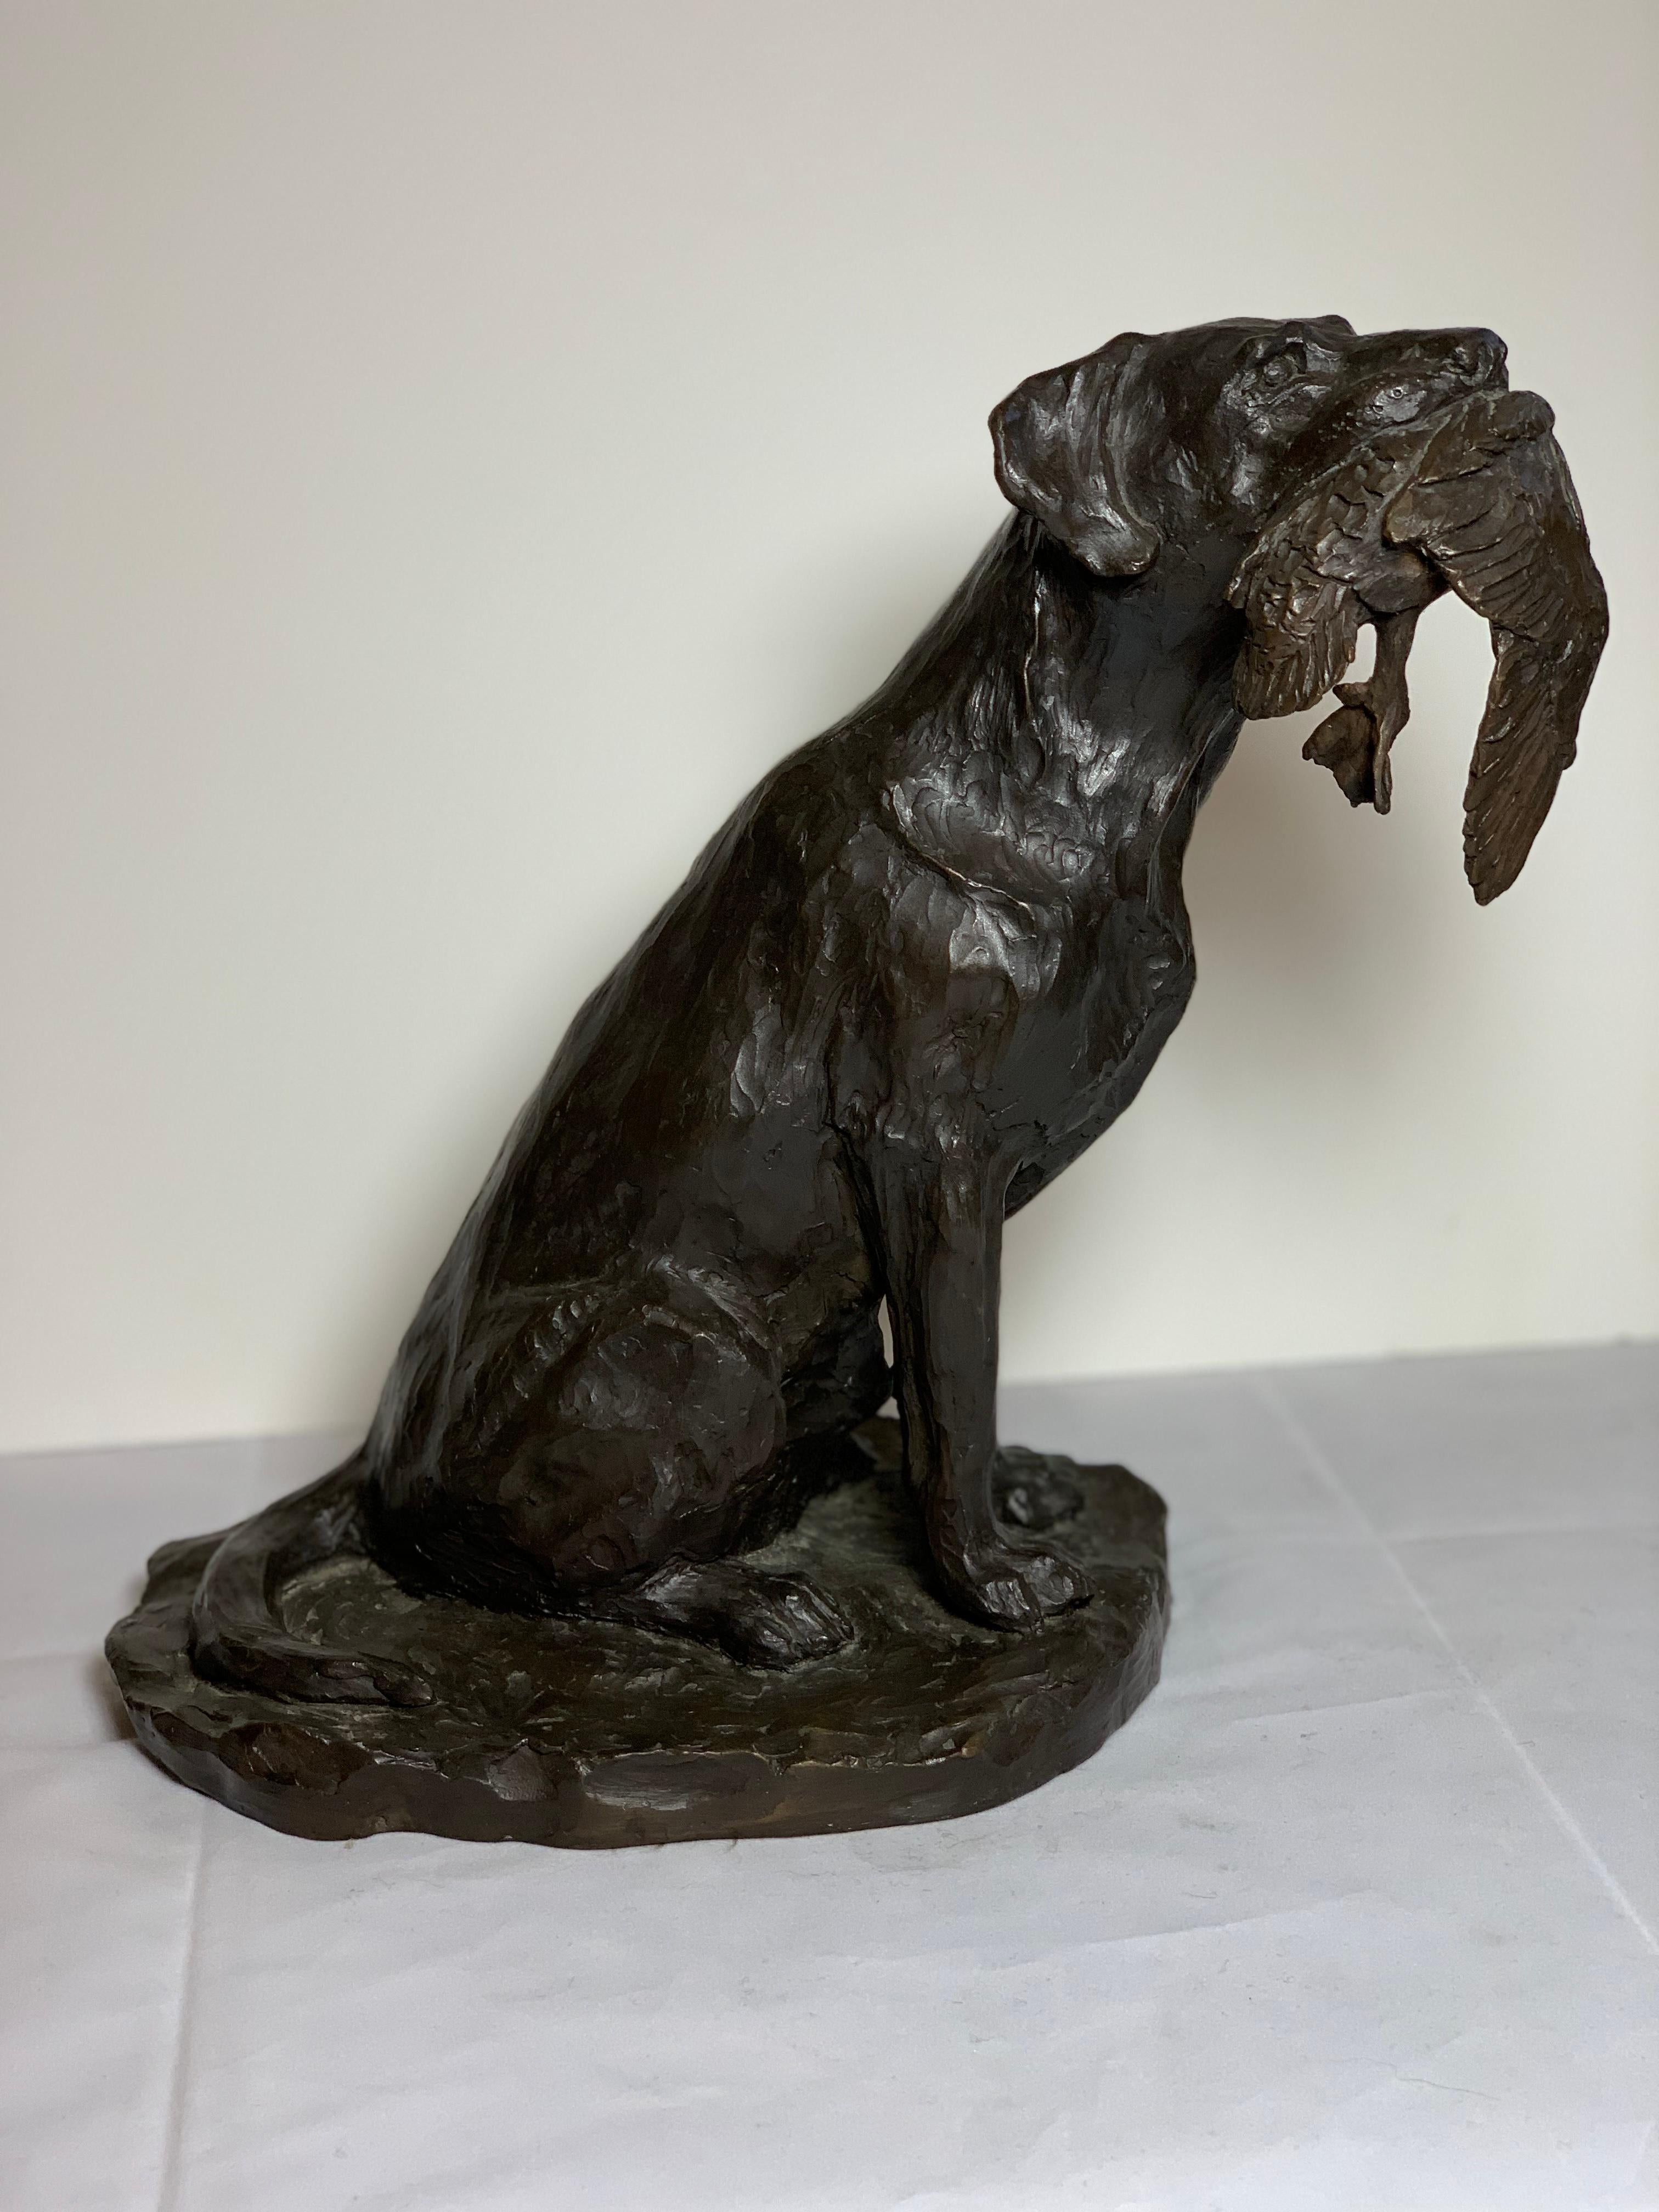 This is a wonderful bronze Labrador Retriever by William H. Turner. It is signed, dated and numbered. It has a nice patina. Since 1983, William H. and David H. Turner, a father and son team, have been designing and casting wildlife sculptures in